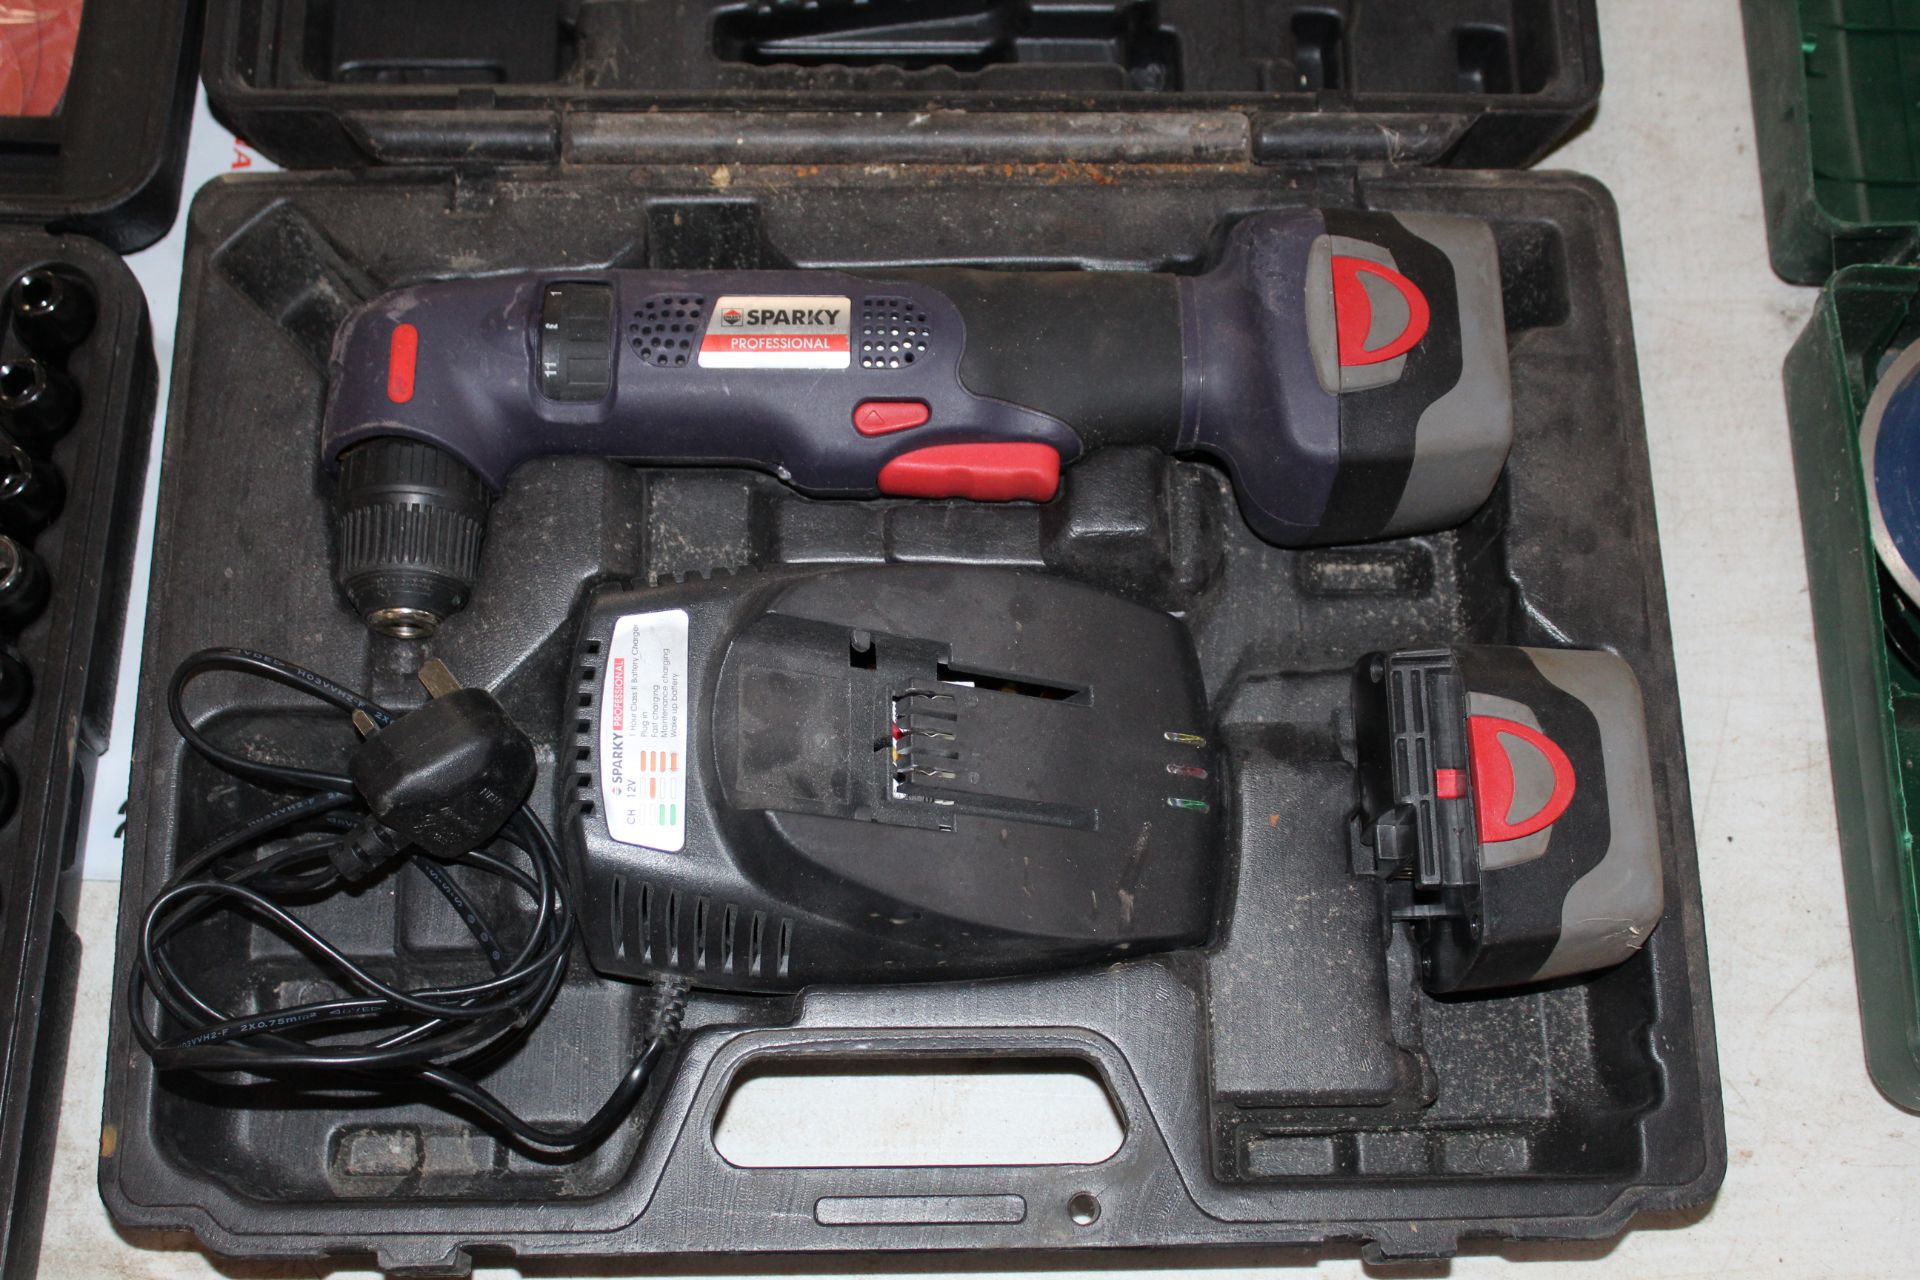 Cordless electric drill. - Image 2 of 2